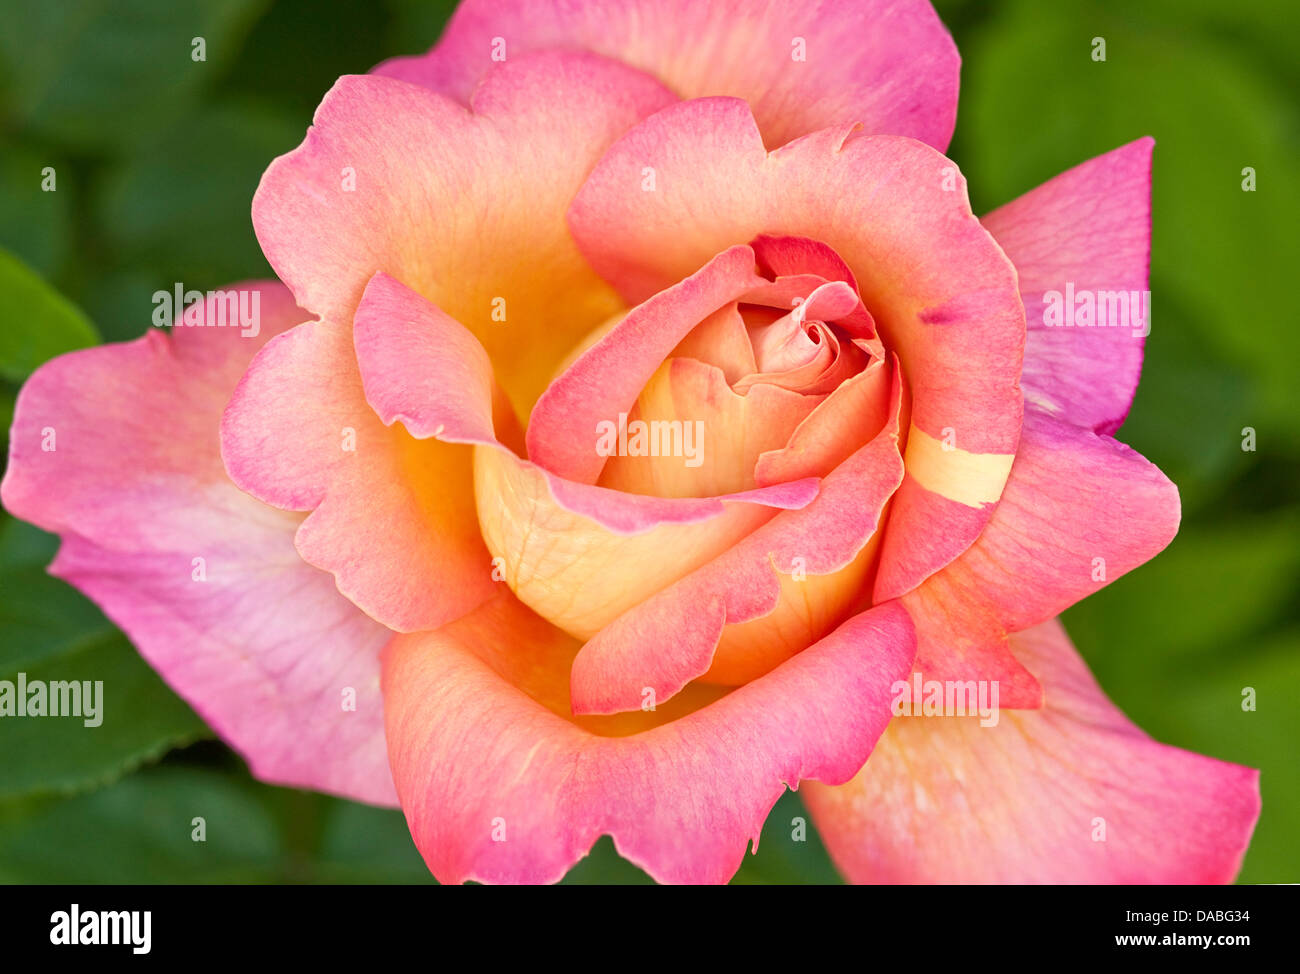 Colorful rose blossom with yellow, magenta and orange tones Stock Photo